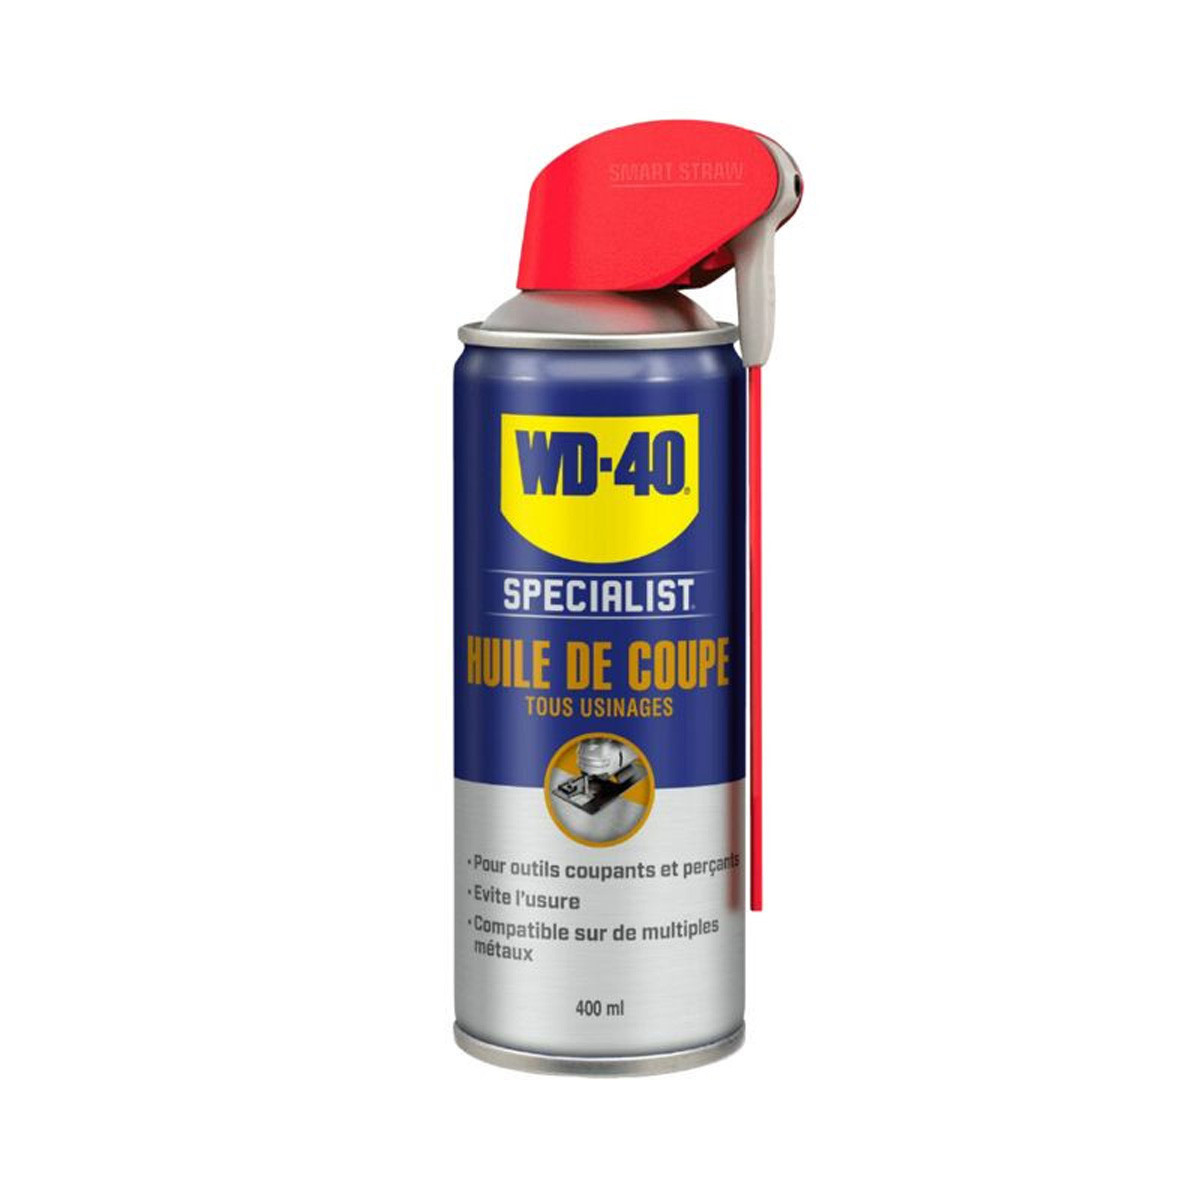 Aceite lubricante WD-40 200ml